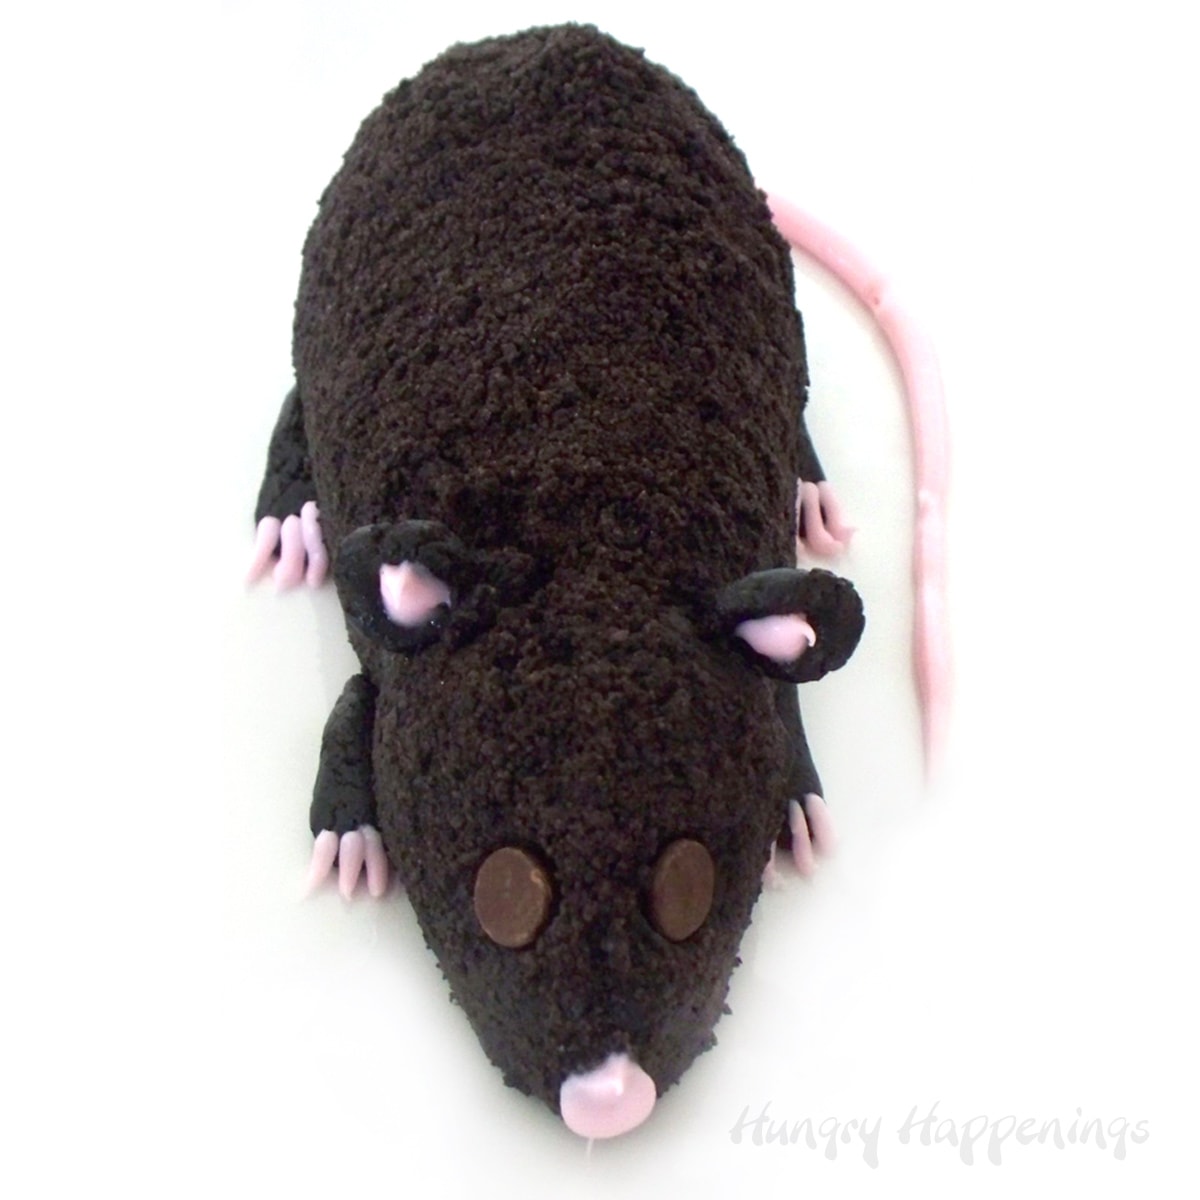 Chocolate cheese ball rat covered in crushed OREO Cookies and decorated with pink cream cheese frosting.